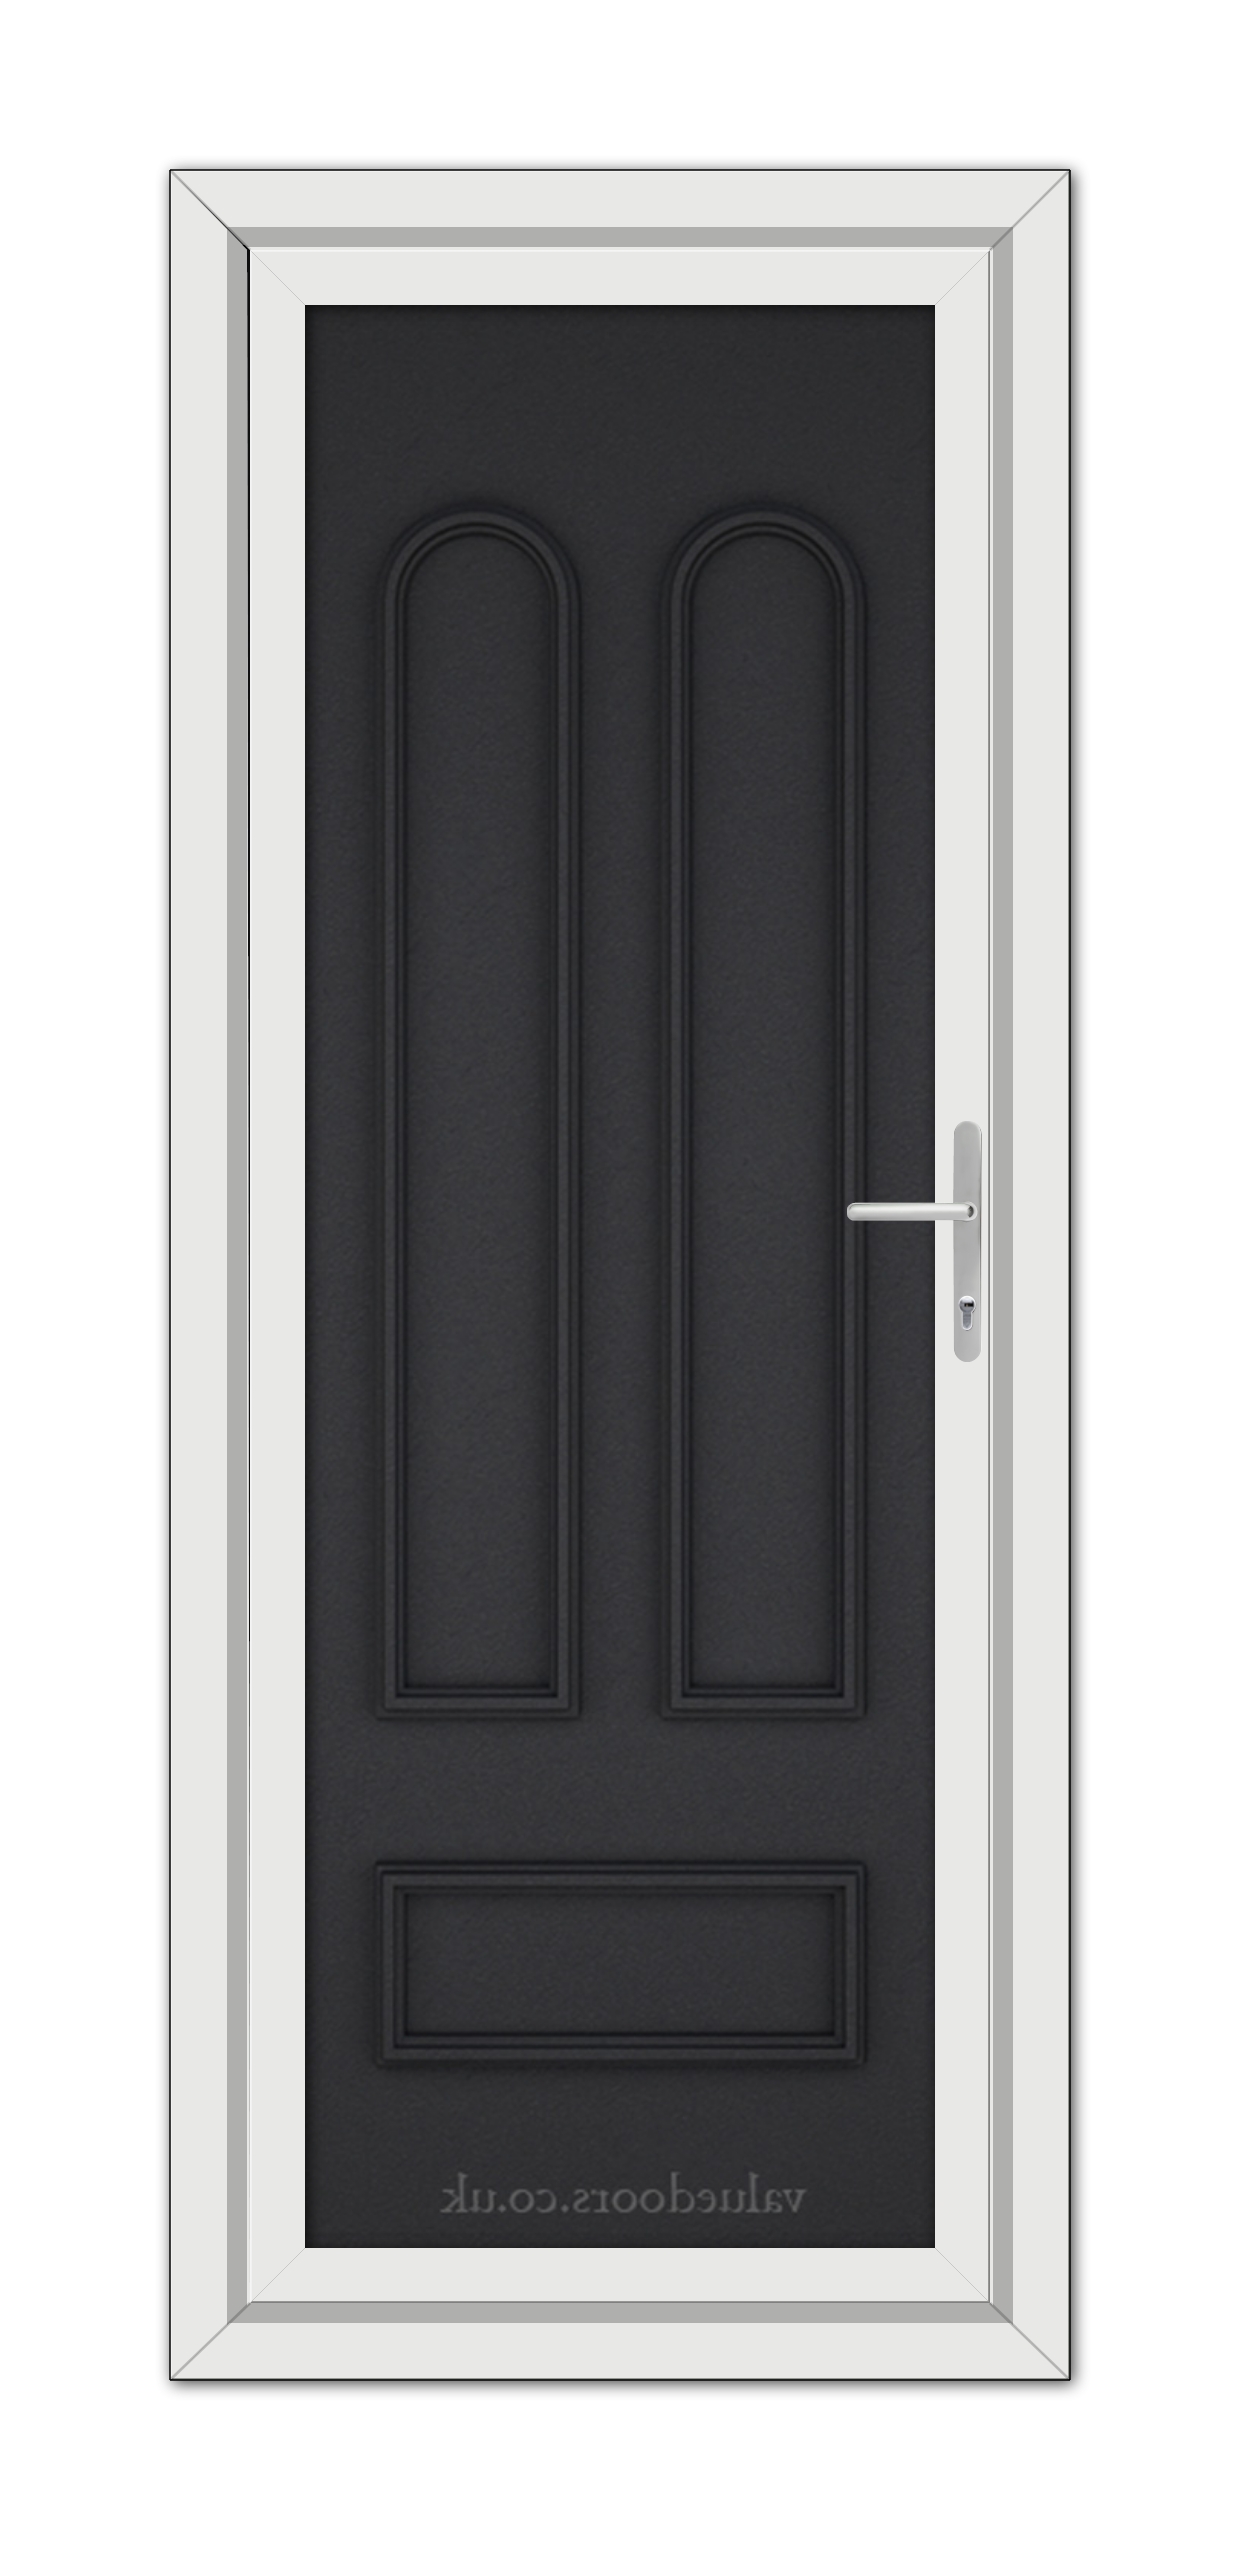 A vertical image of a Black Brown Madrid Solid uPVC Door with two elongated panels, a metallic handle on the right, framed by a white door frame.